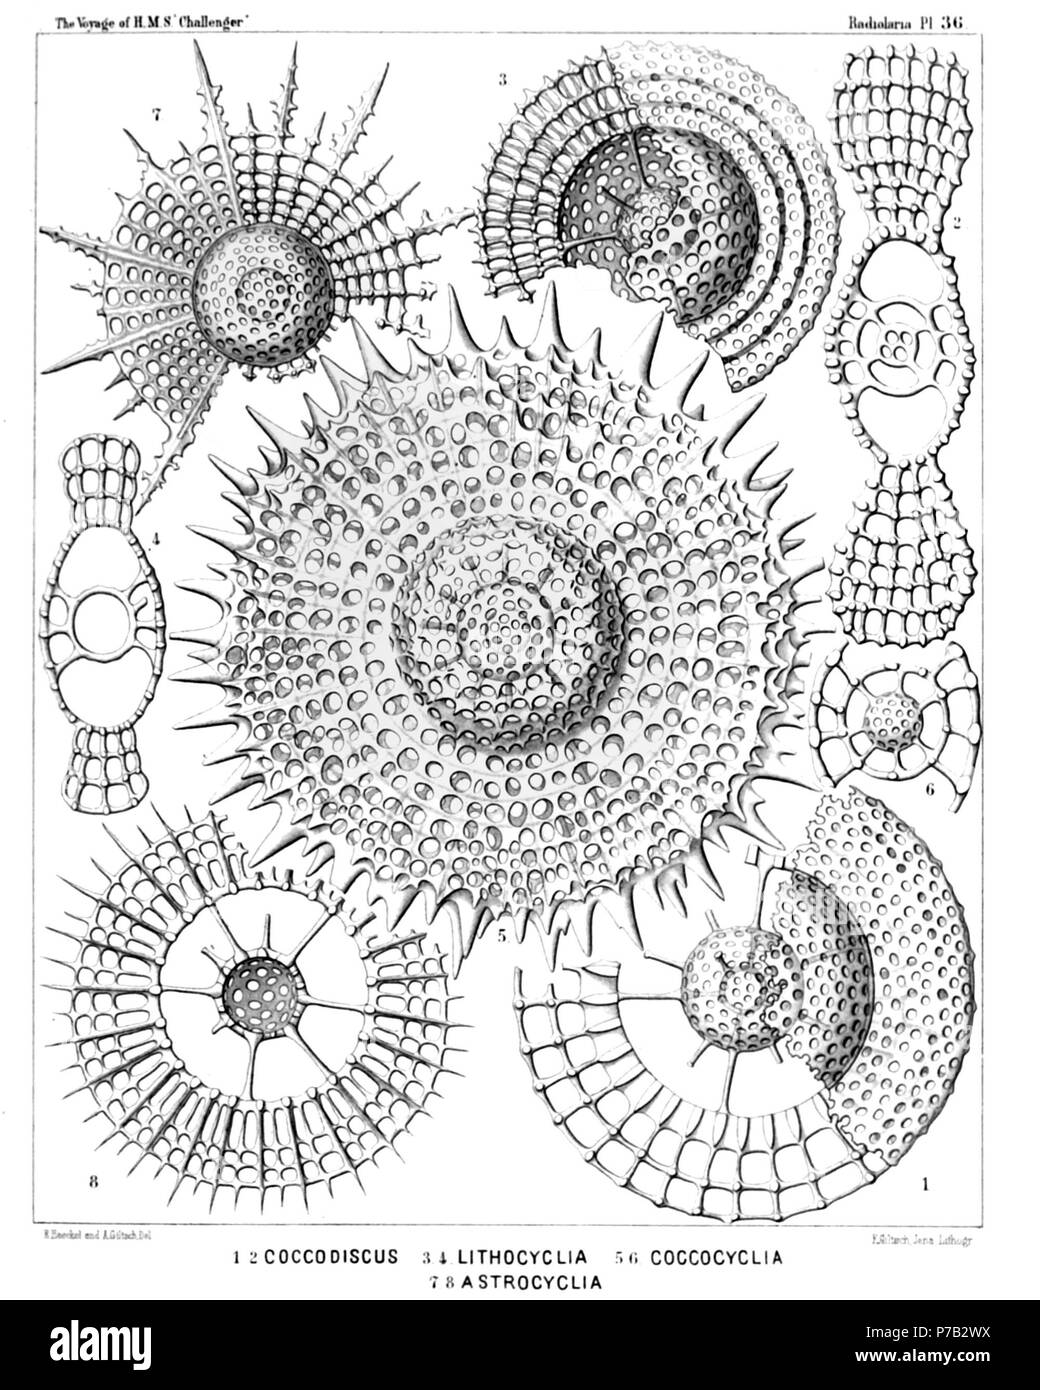 English: Illustration from Report on the Radiolaria collected by H.M.S. Challenger during the years 1873-1876. Part III. Original description follows:  Plate 36. Coccodiscida.  Diam.  Fig. 1. Coccodiscus lamarckii, n. sp., × 500  The left half of the figure represents a horizontal section through the peripheral shell, the right half a view of the surface.  Fig. 2. Coccodiscus gœthei, n. sp., × 500  Vertical section nearly through the centre.  Fig. 3. Lithocyclia lenticula, n. sp., × 400  Fig. 4. Lithocyclia lenticula, n. sp., × 400  Vertical section through the centre.  Fig. 5. Coccocyclia hel Stock Photo